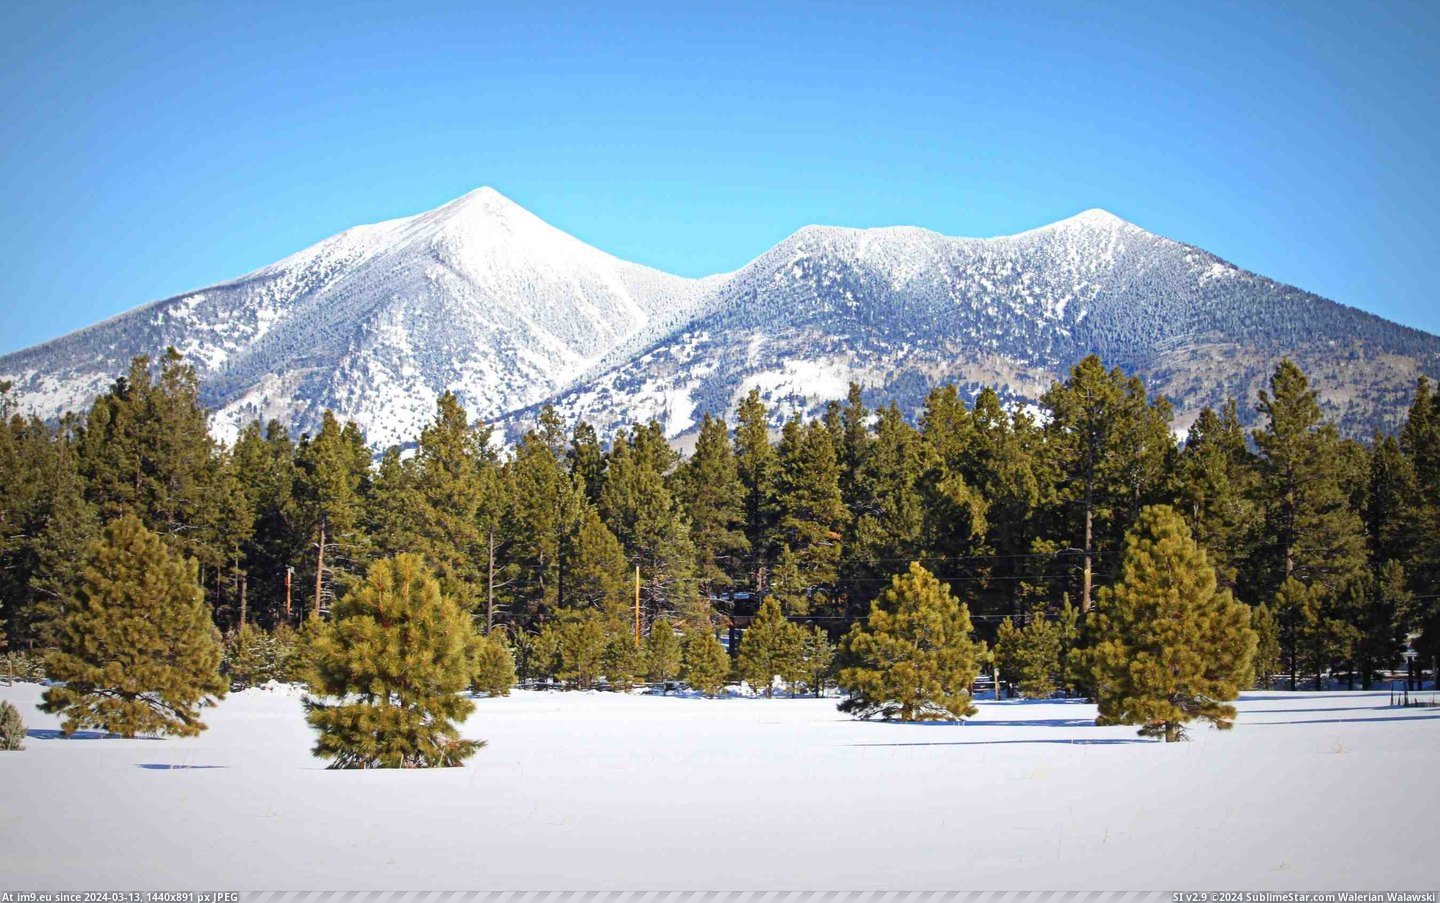 #One #Favorite #San #Highest #Peaks #Point #Francisco #Arizona [Earthporn] One of my favorite pictures of the San Francisco Peaks -- the highest point in Arizona [2697x1680] [OC] Pic. (Изображение из альбом My r/EARTHPORN favs))